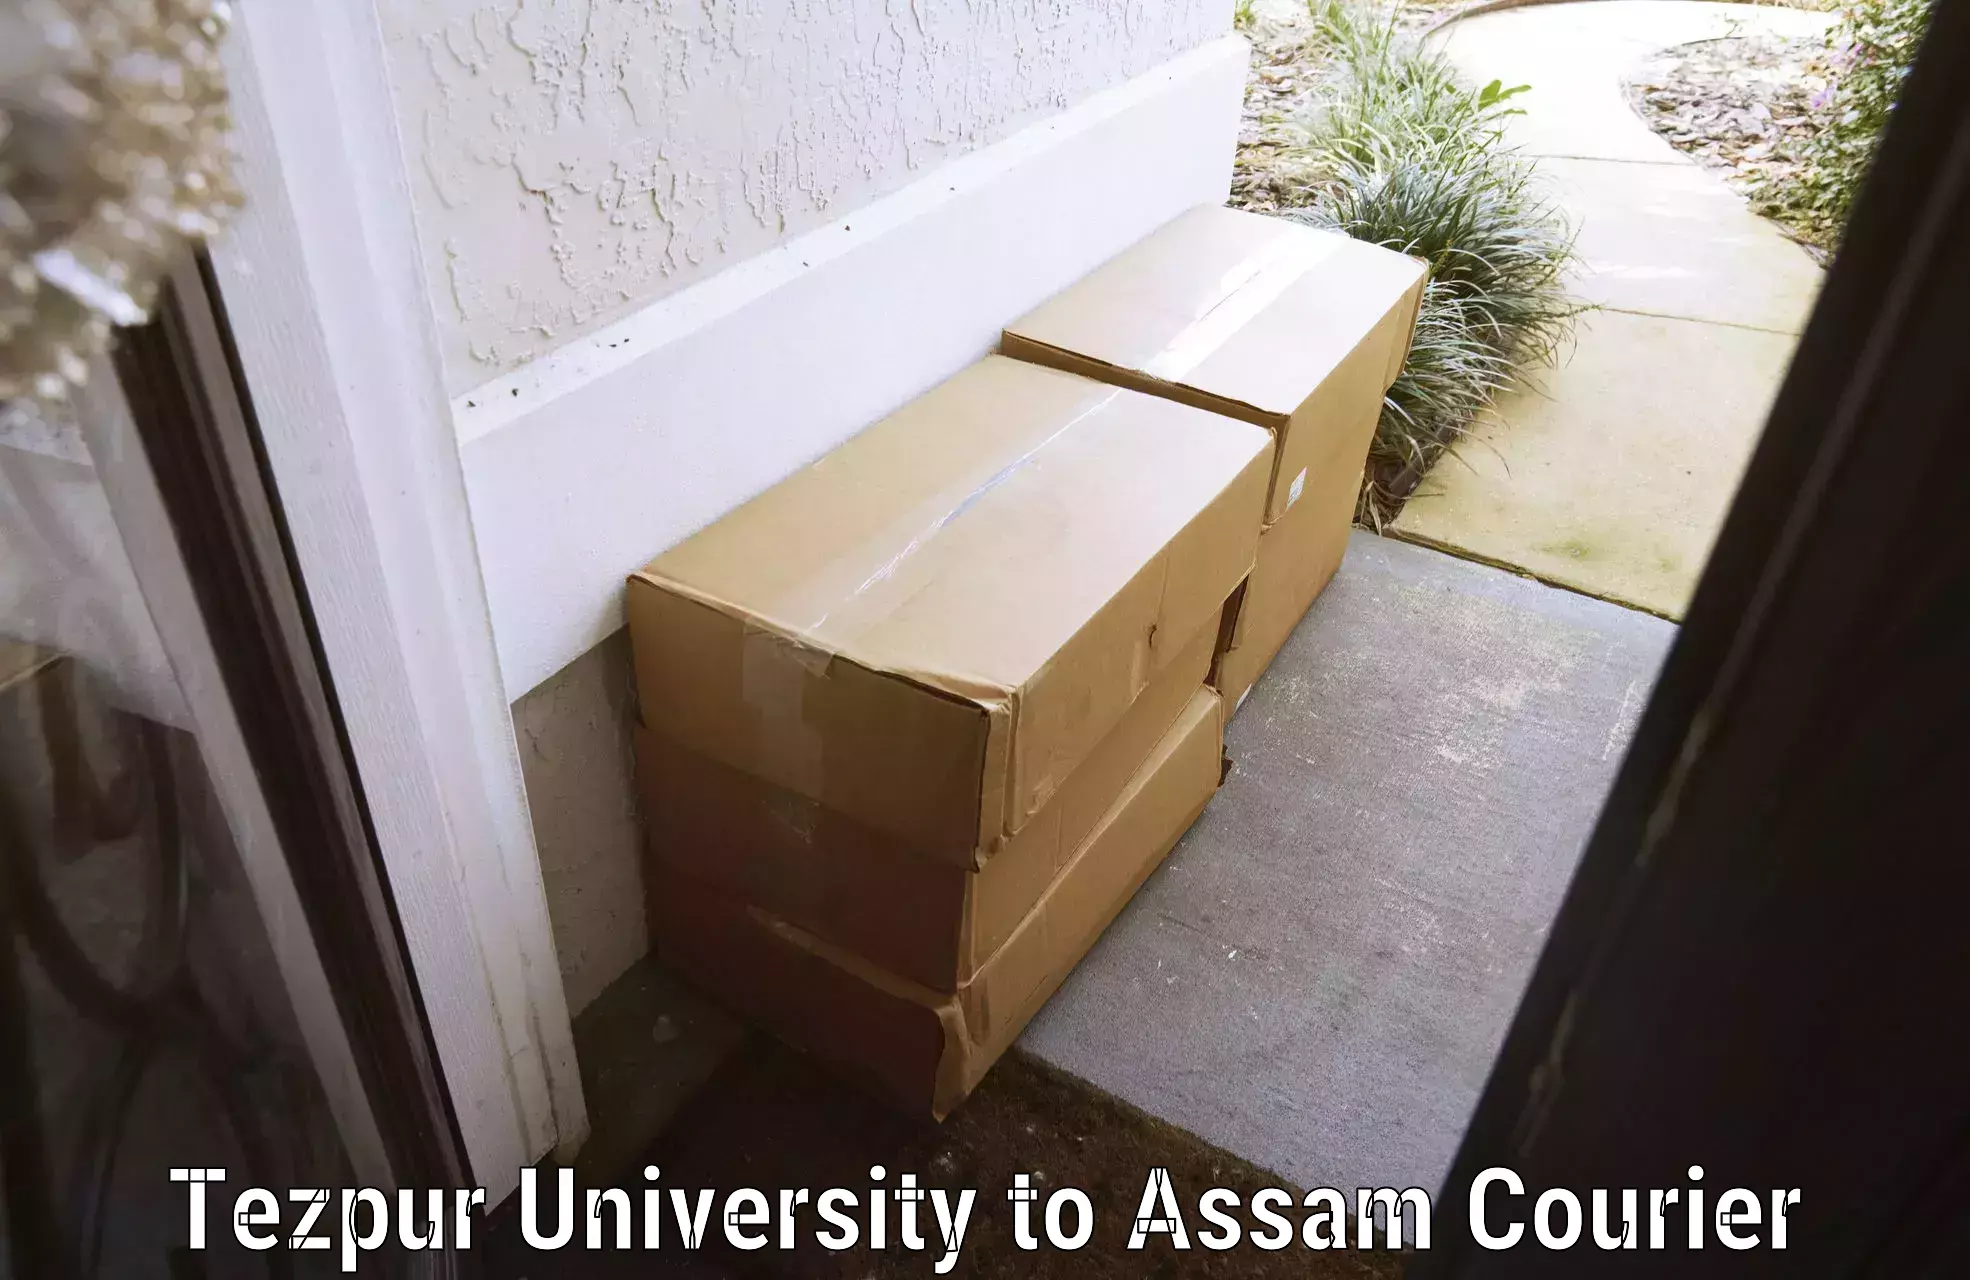 Baggage delivery planning Tezpur University to Dibrugarh